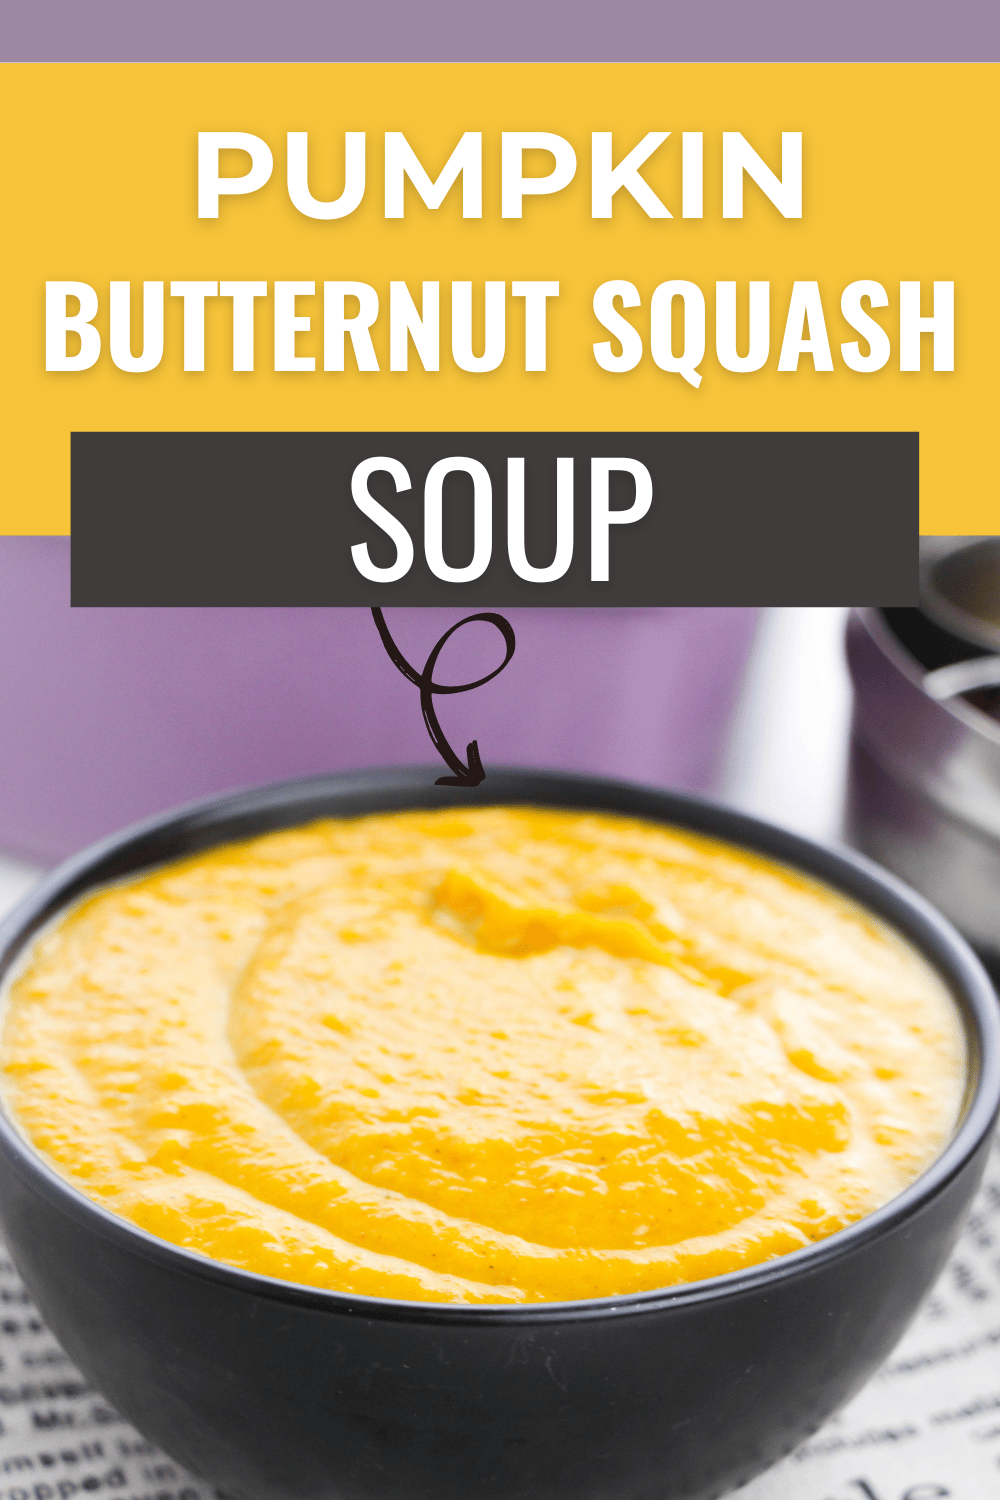 This Pumpkin Butternut Squash Soup is the perfect fall soup! It’s easy to make, healthy, and so delicious. #pumpkinbutternutsquashsoup #pumpkin #butternutsquash #soup #recipe via @wondermomwannab